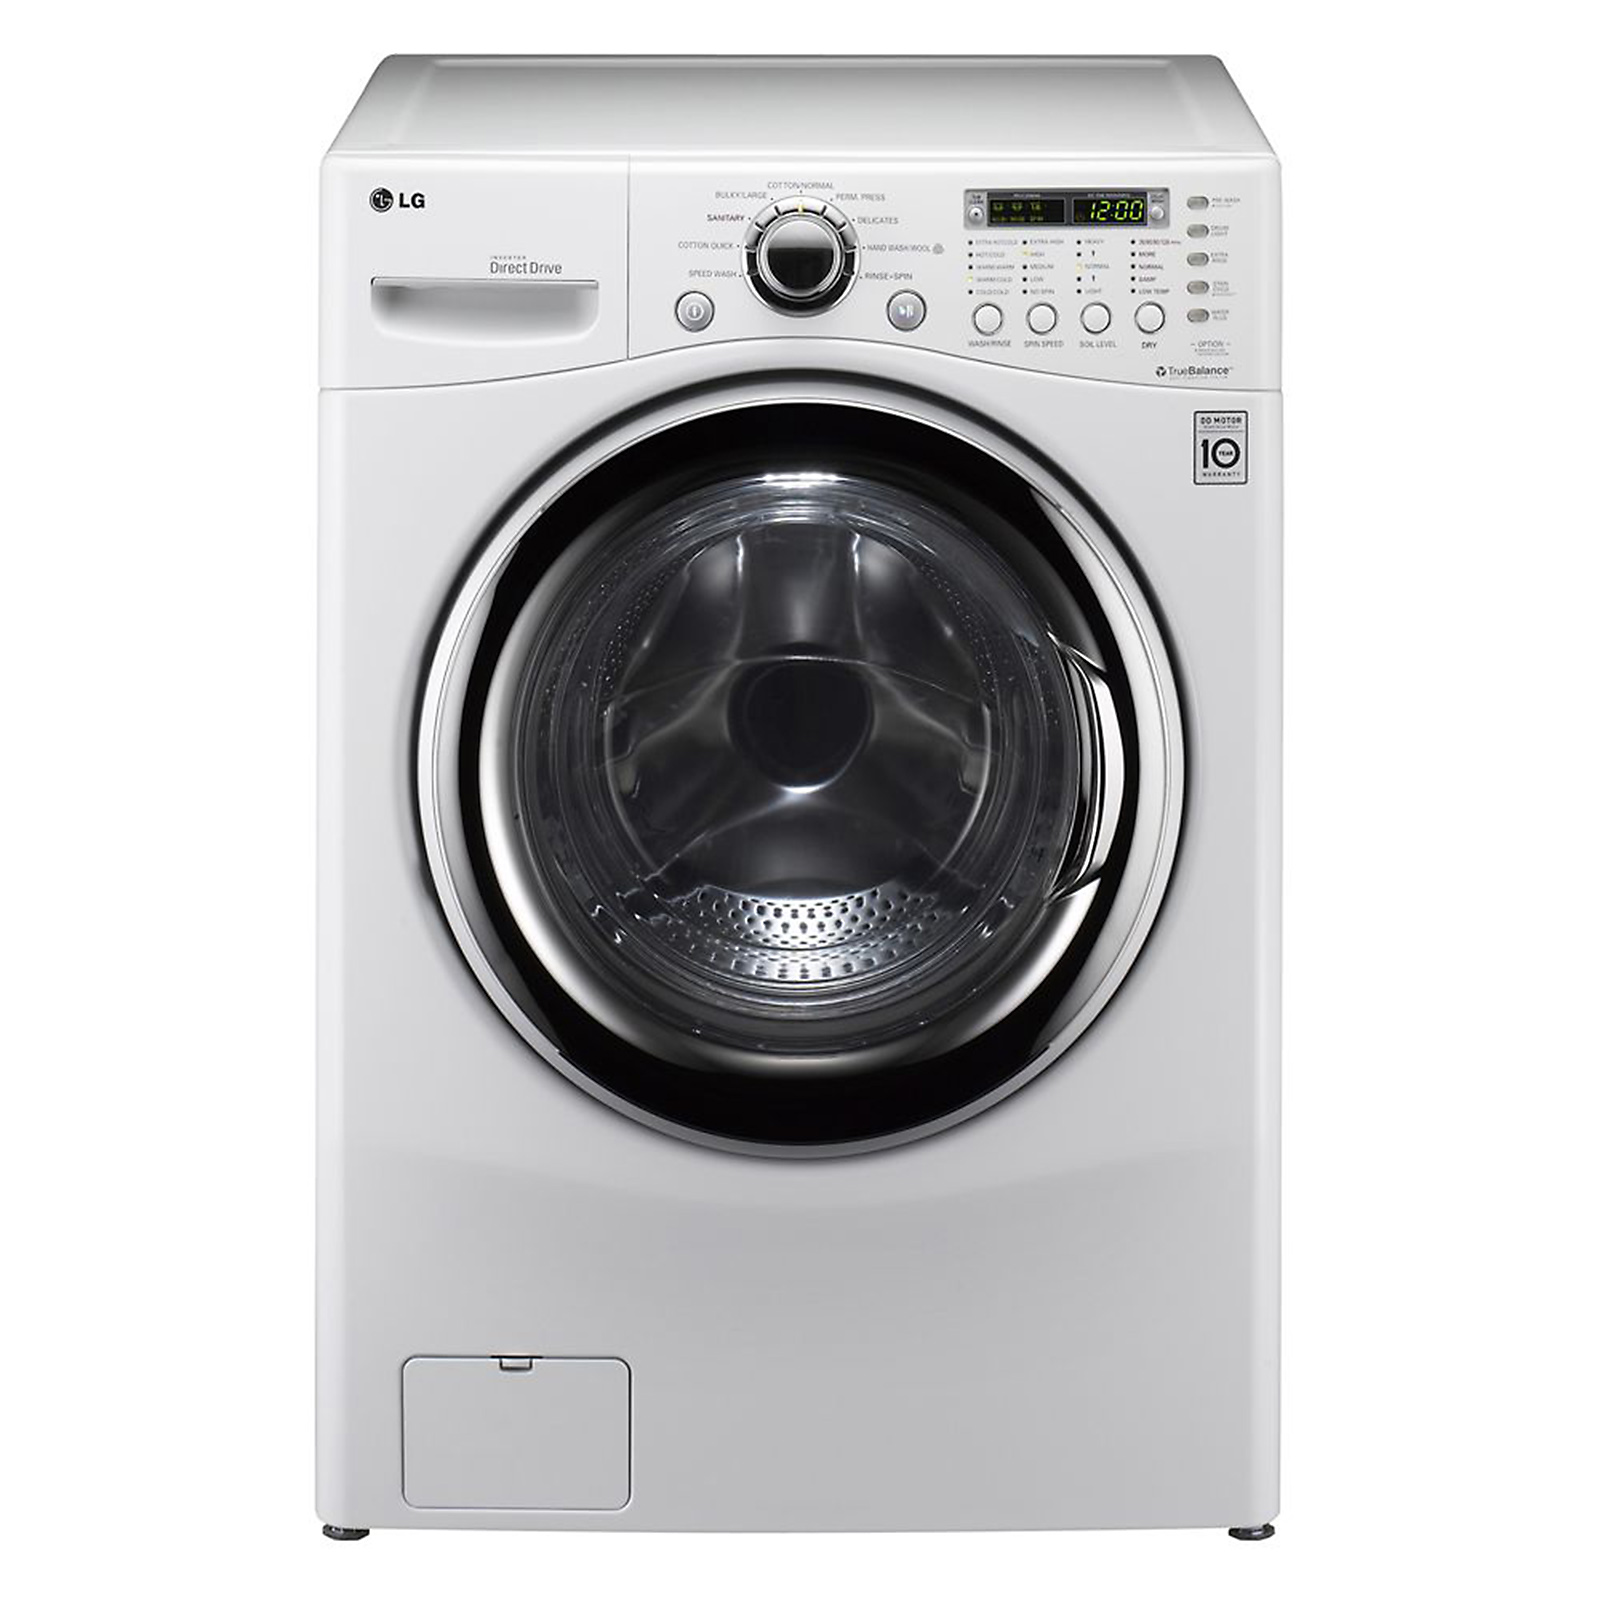 LG All In One Washer and Dryer 3.6 cu. ft. WM3987HW Sears